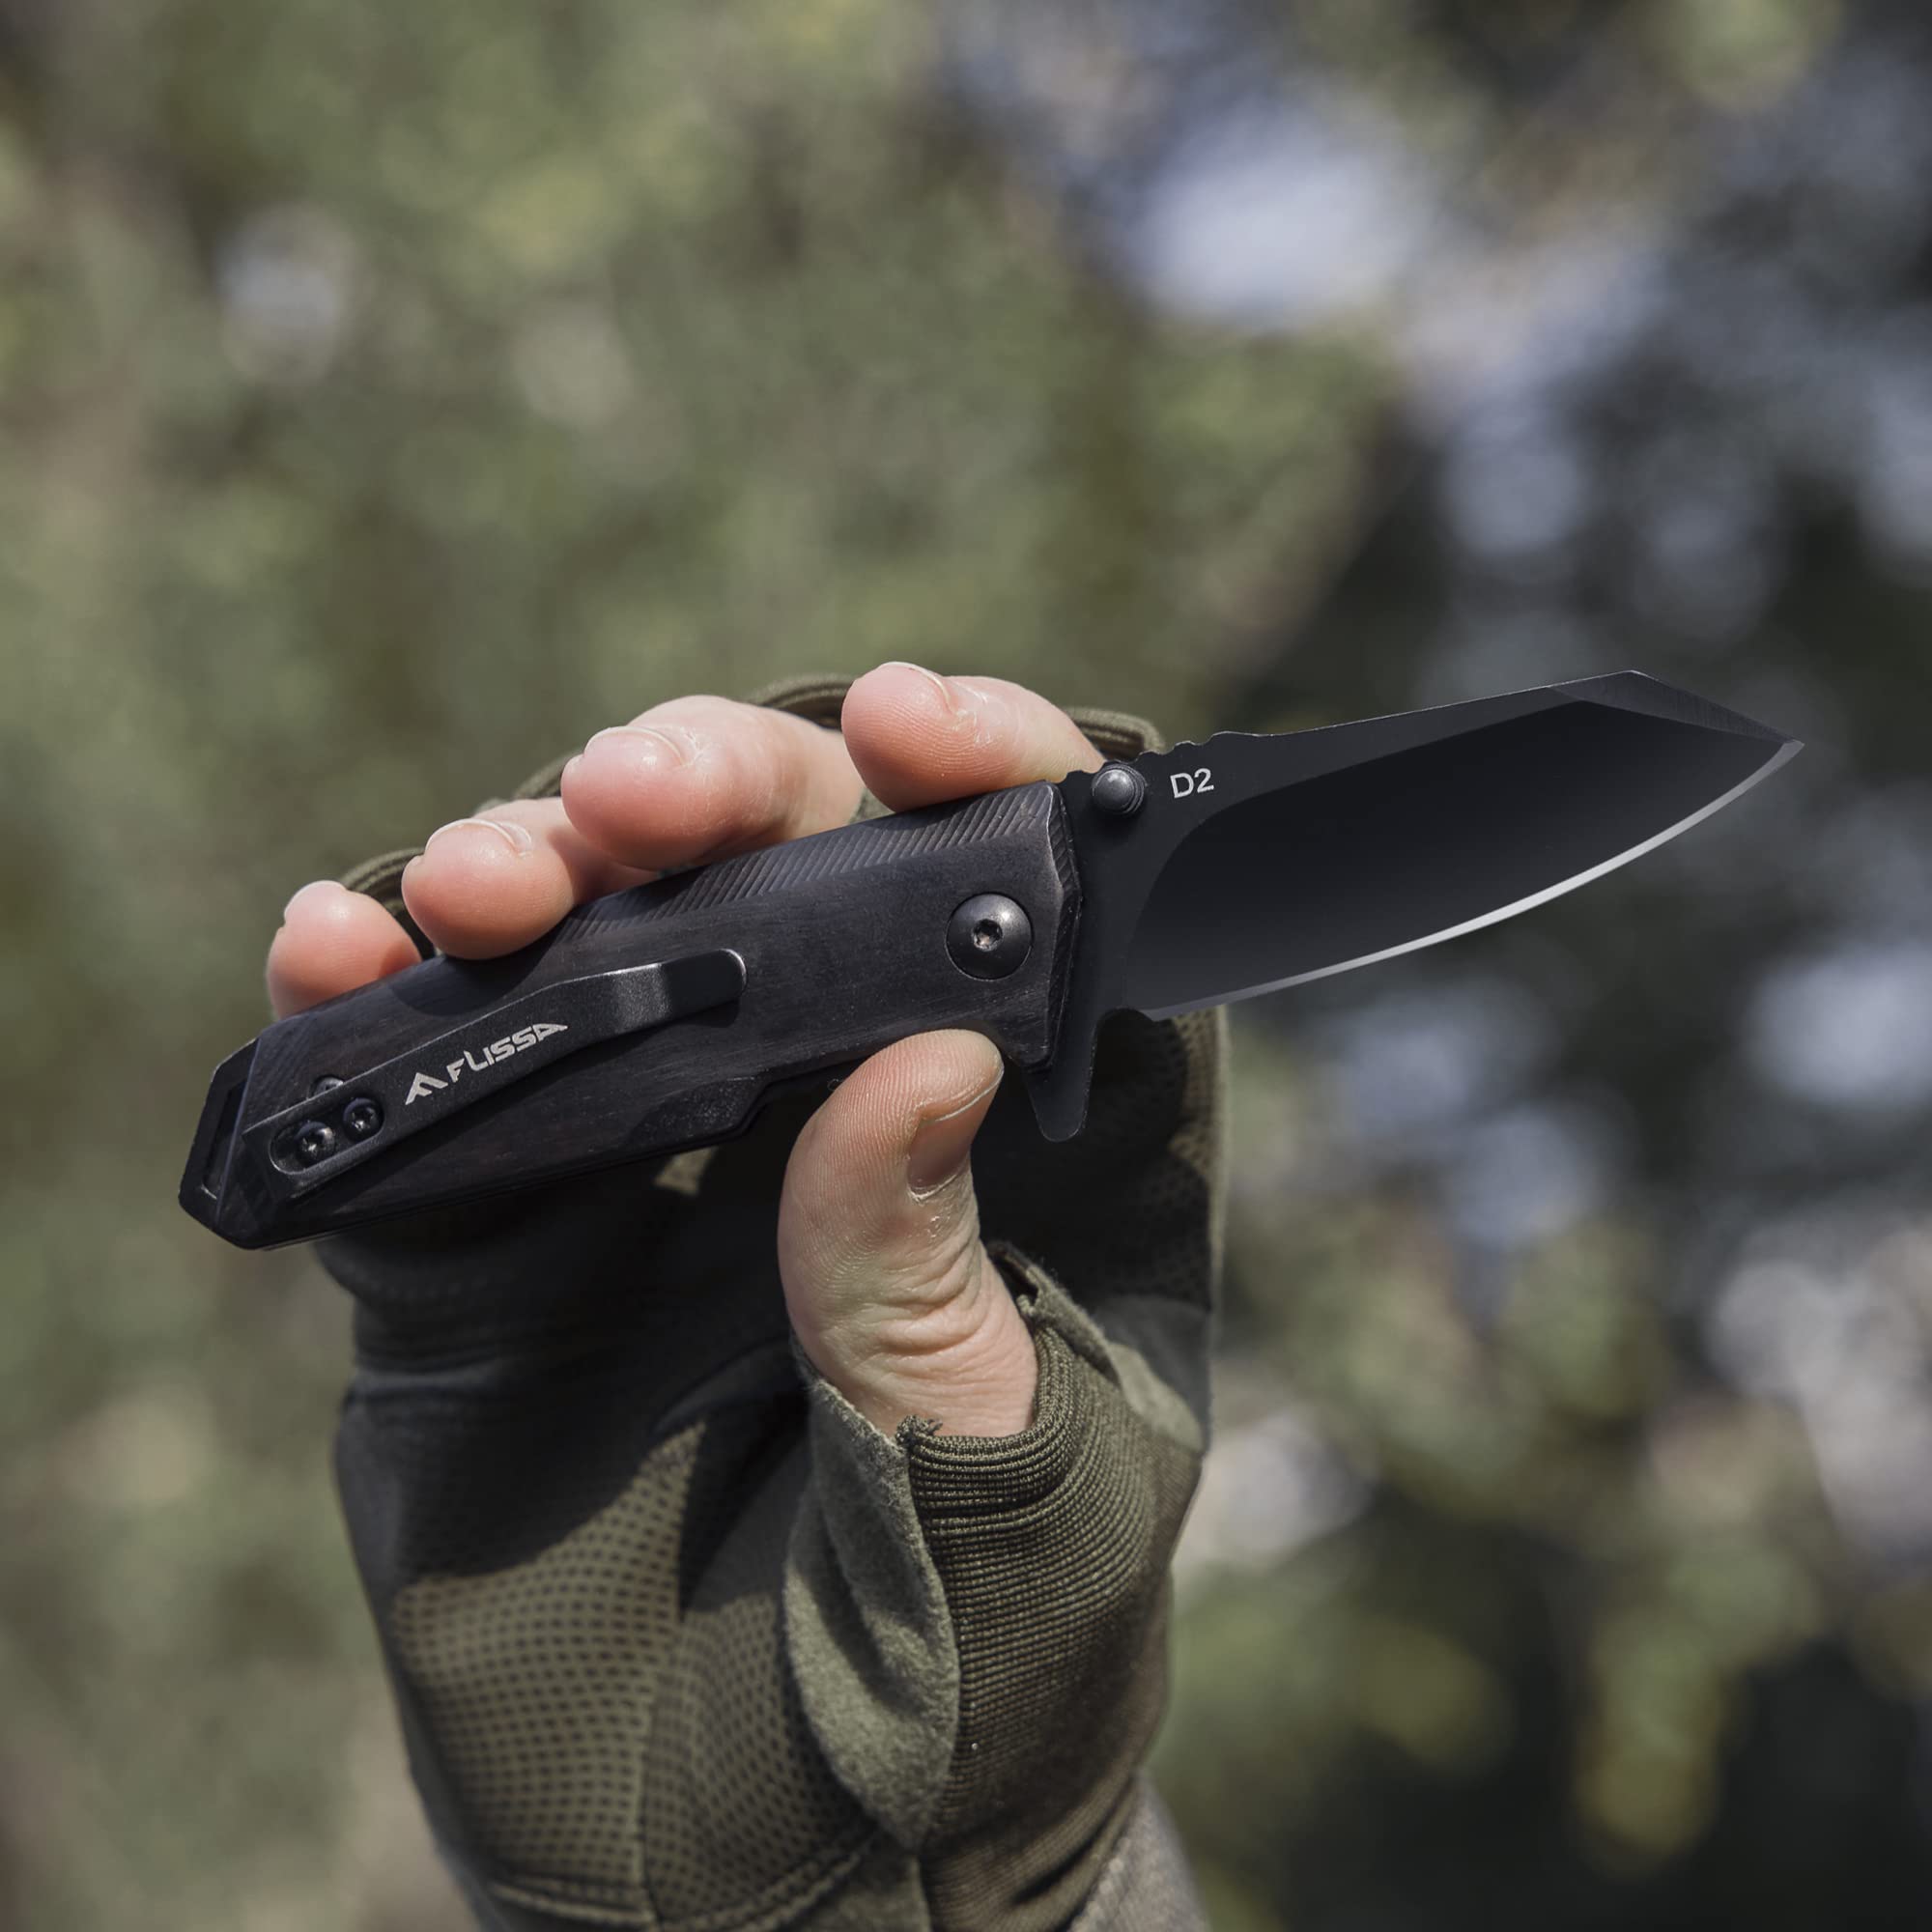 FLISSA Small Pocket Knife, 2-3/4" D2 Steel Blade, EDC Folding Knives, Ebony Wood Handle with Clip, Mini Knife with Liner Lock for Everyday Carry Camping Survival Hiking